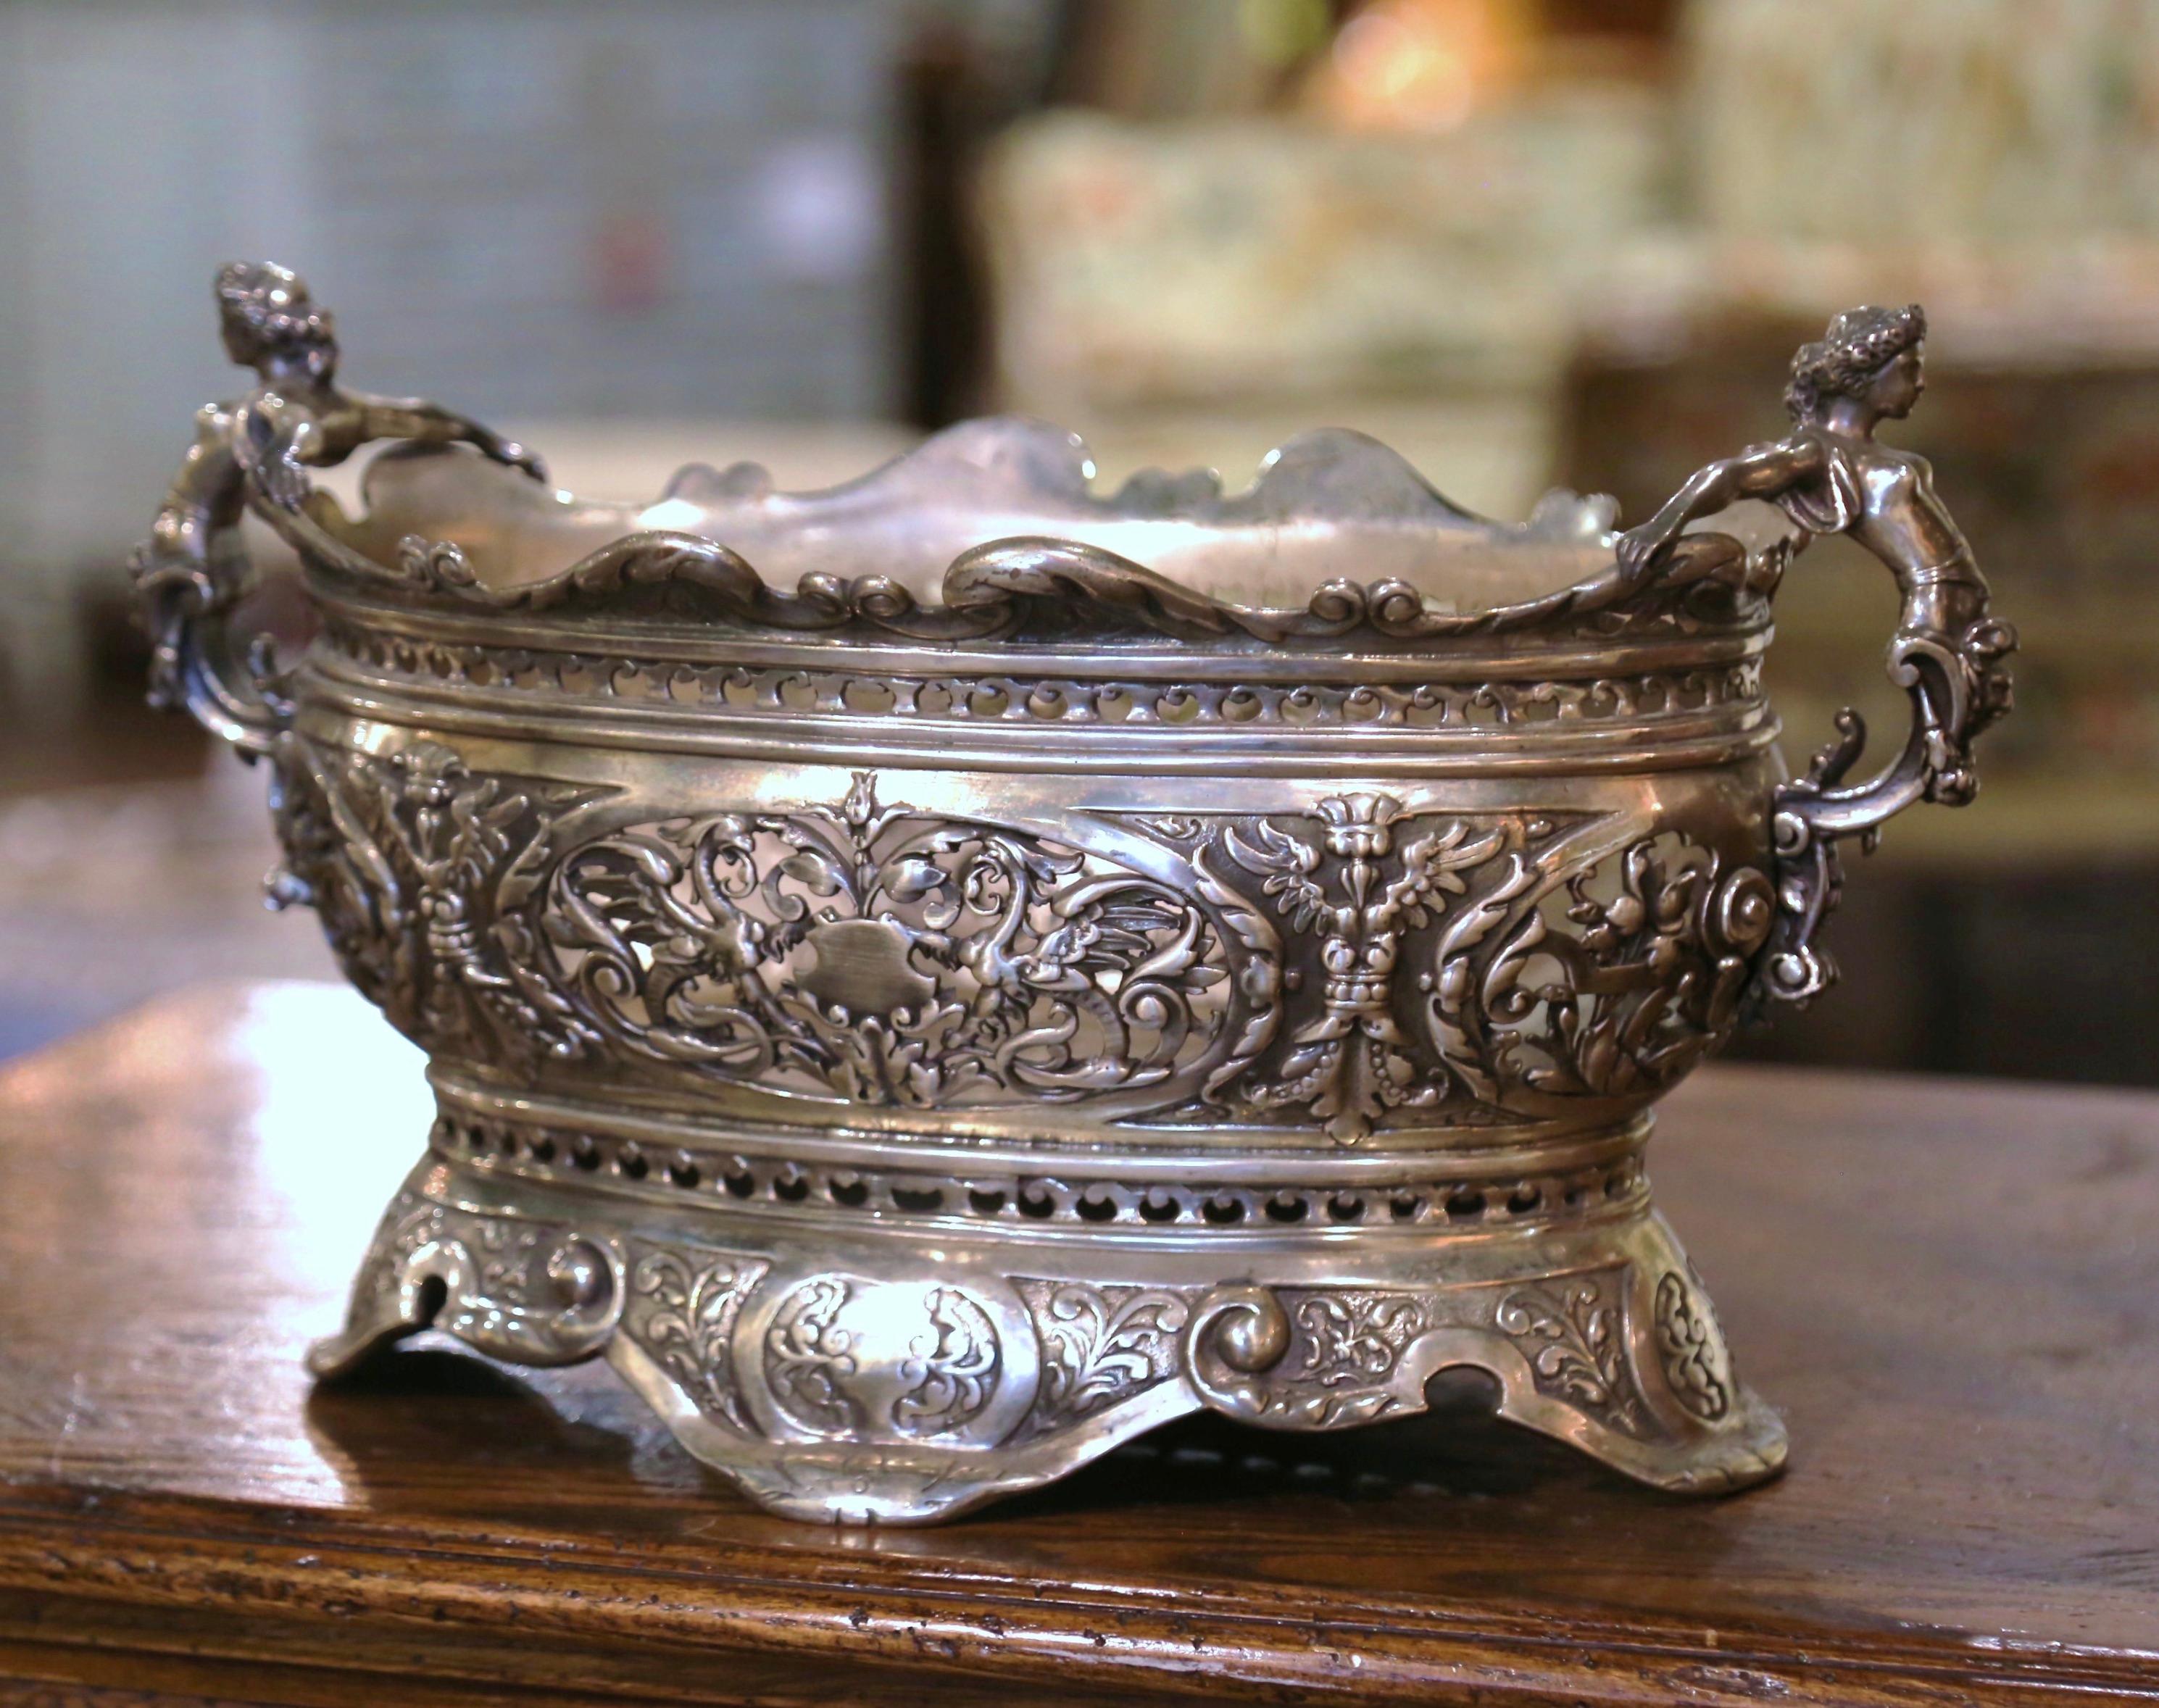 Decorate a dining table with this elegant antique jardiniere. Crafted in Paris, France circa 1870, and made of bronze with silver plate, the planter is oval in shape and dressed with intricate Roman female figure handles over a scalloped rim